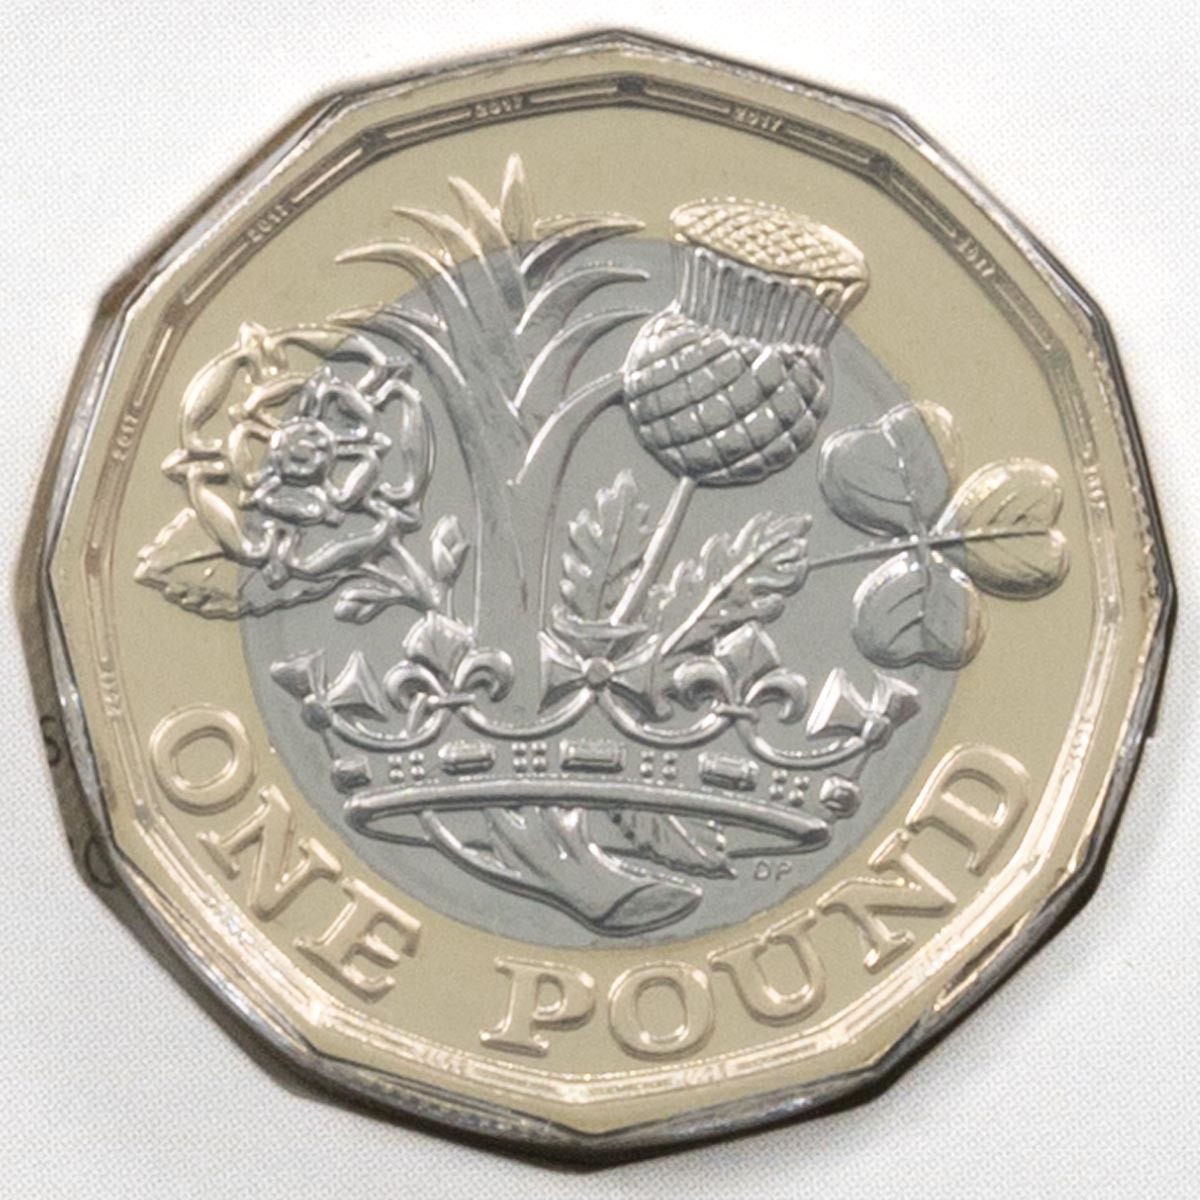 Uk17D1BU 2017 Nations Of The Crown One Pound Brilliant Uncirculated Coin In Folder Reverse